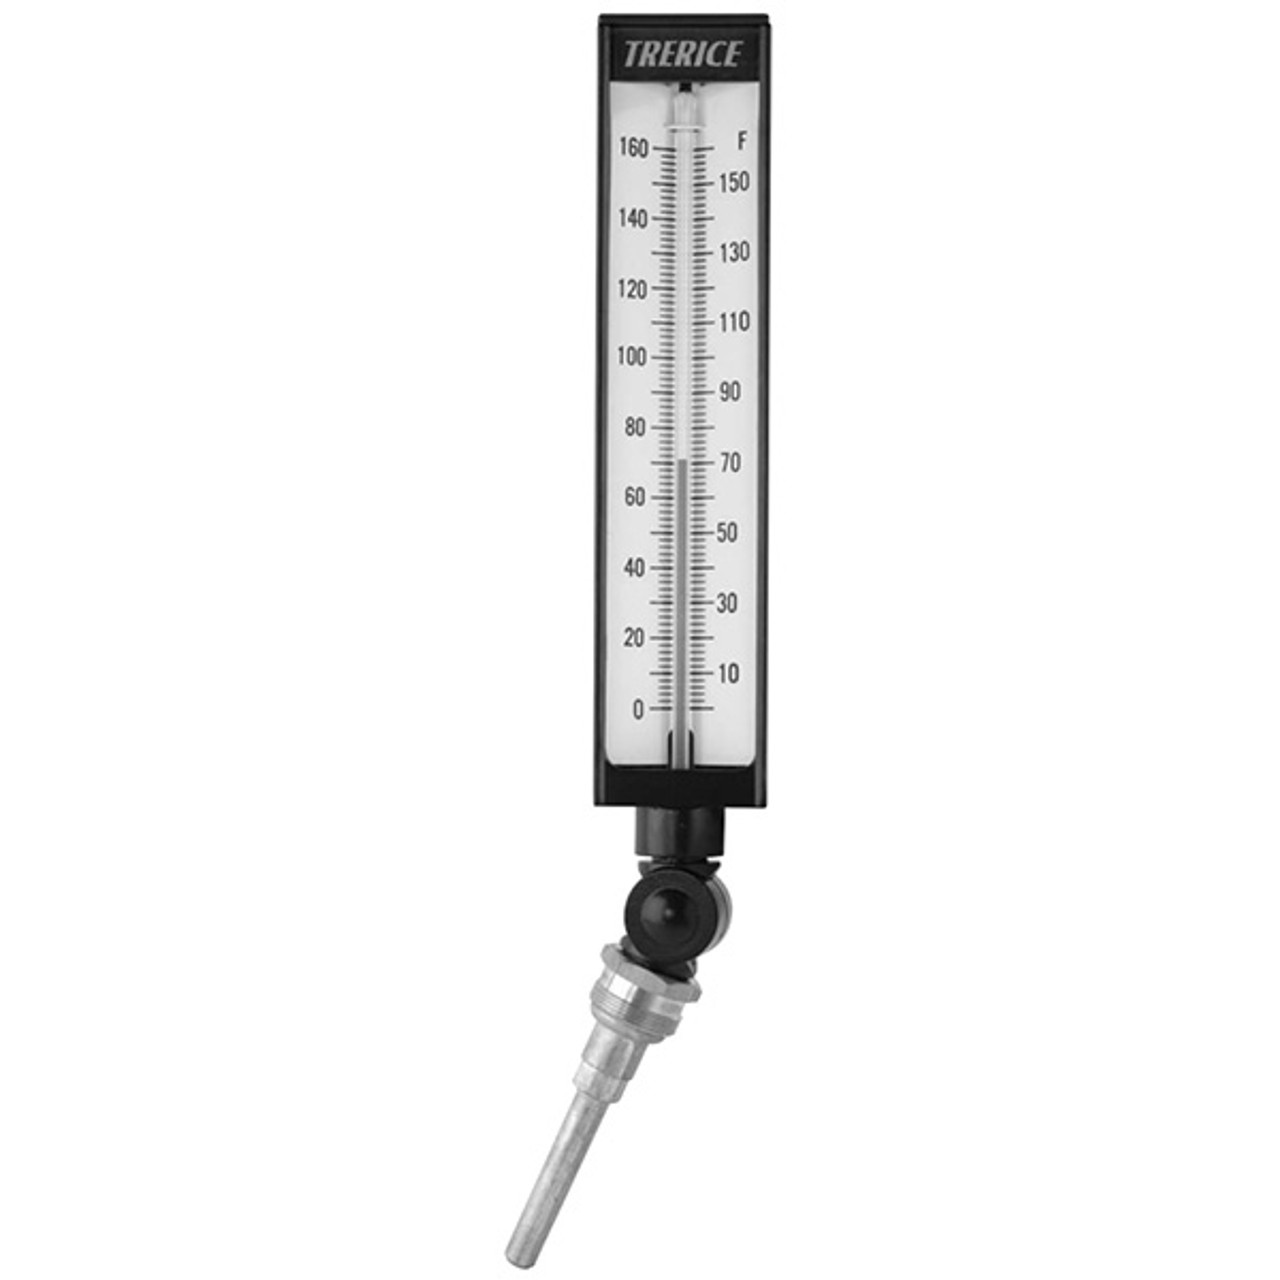 https://cdn11.bigcommerce.com/s-ca10qrhzok/images/stencil/1280x1280/products/149792/351323/trerice-model-bx9-industrial-thermometer-lrg__21985.1665571559.jpg?c=1